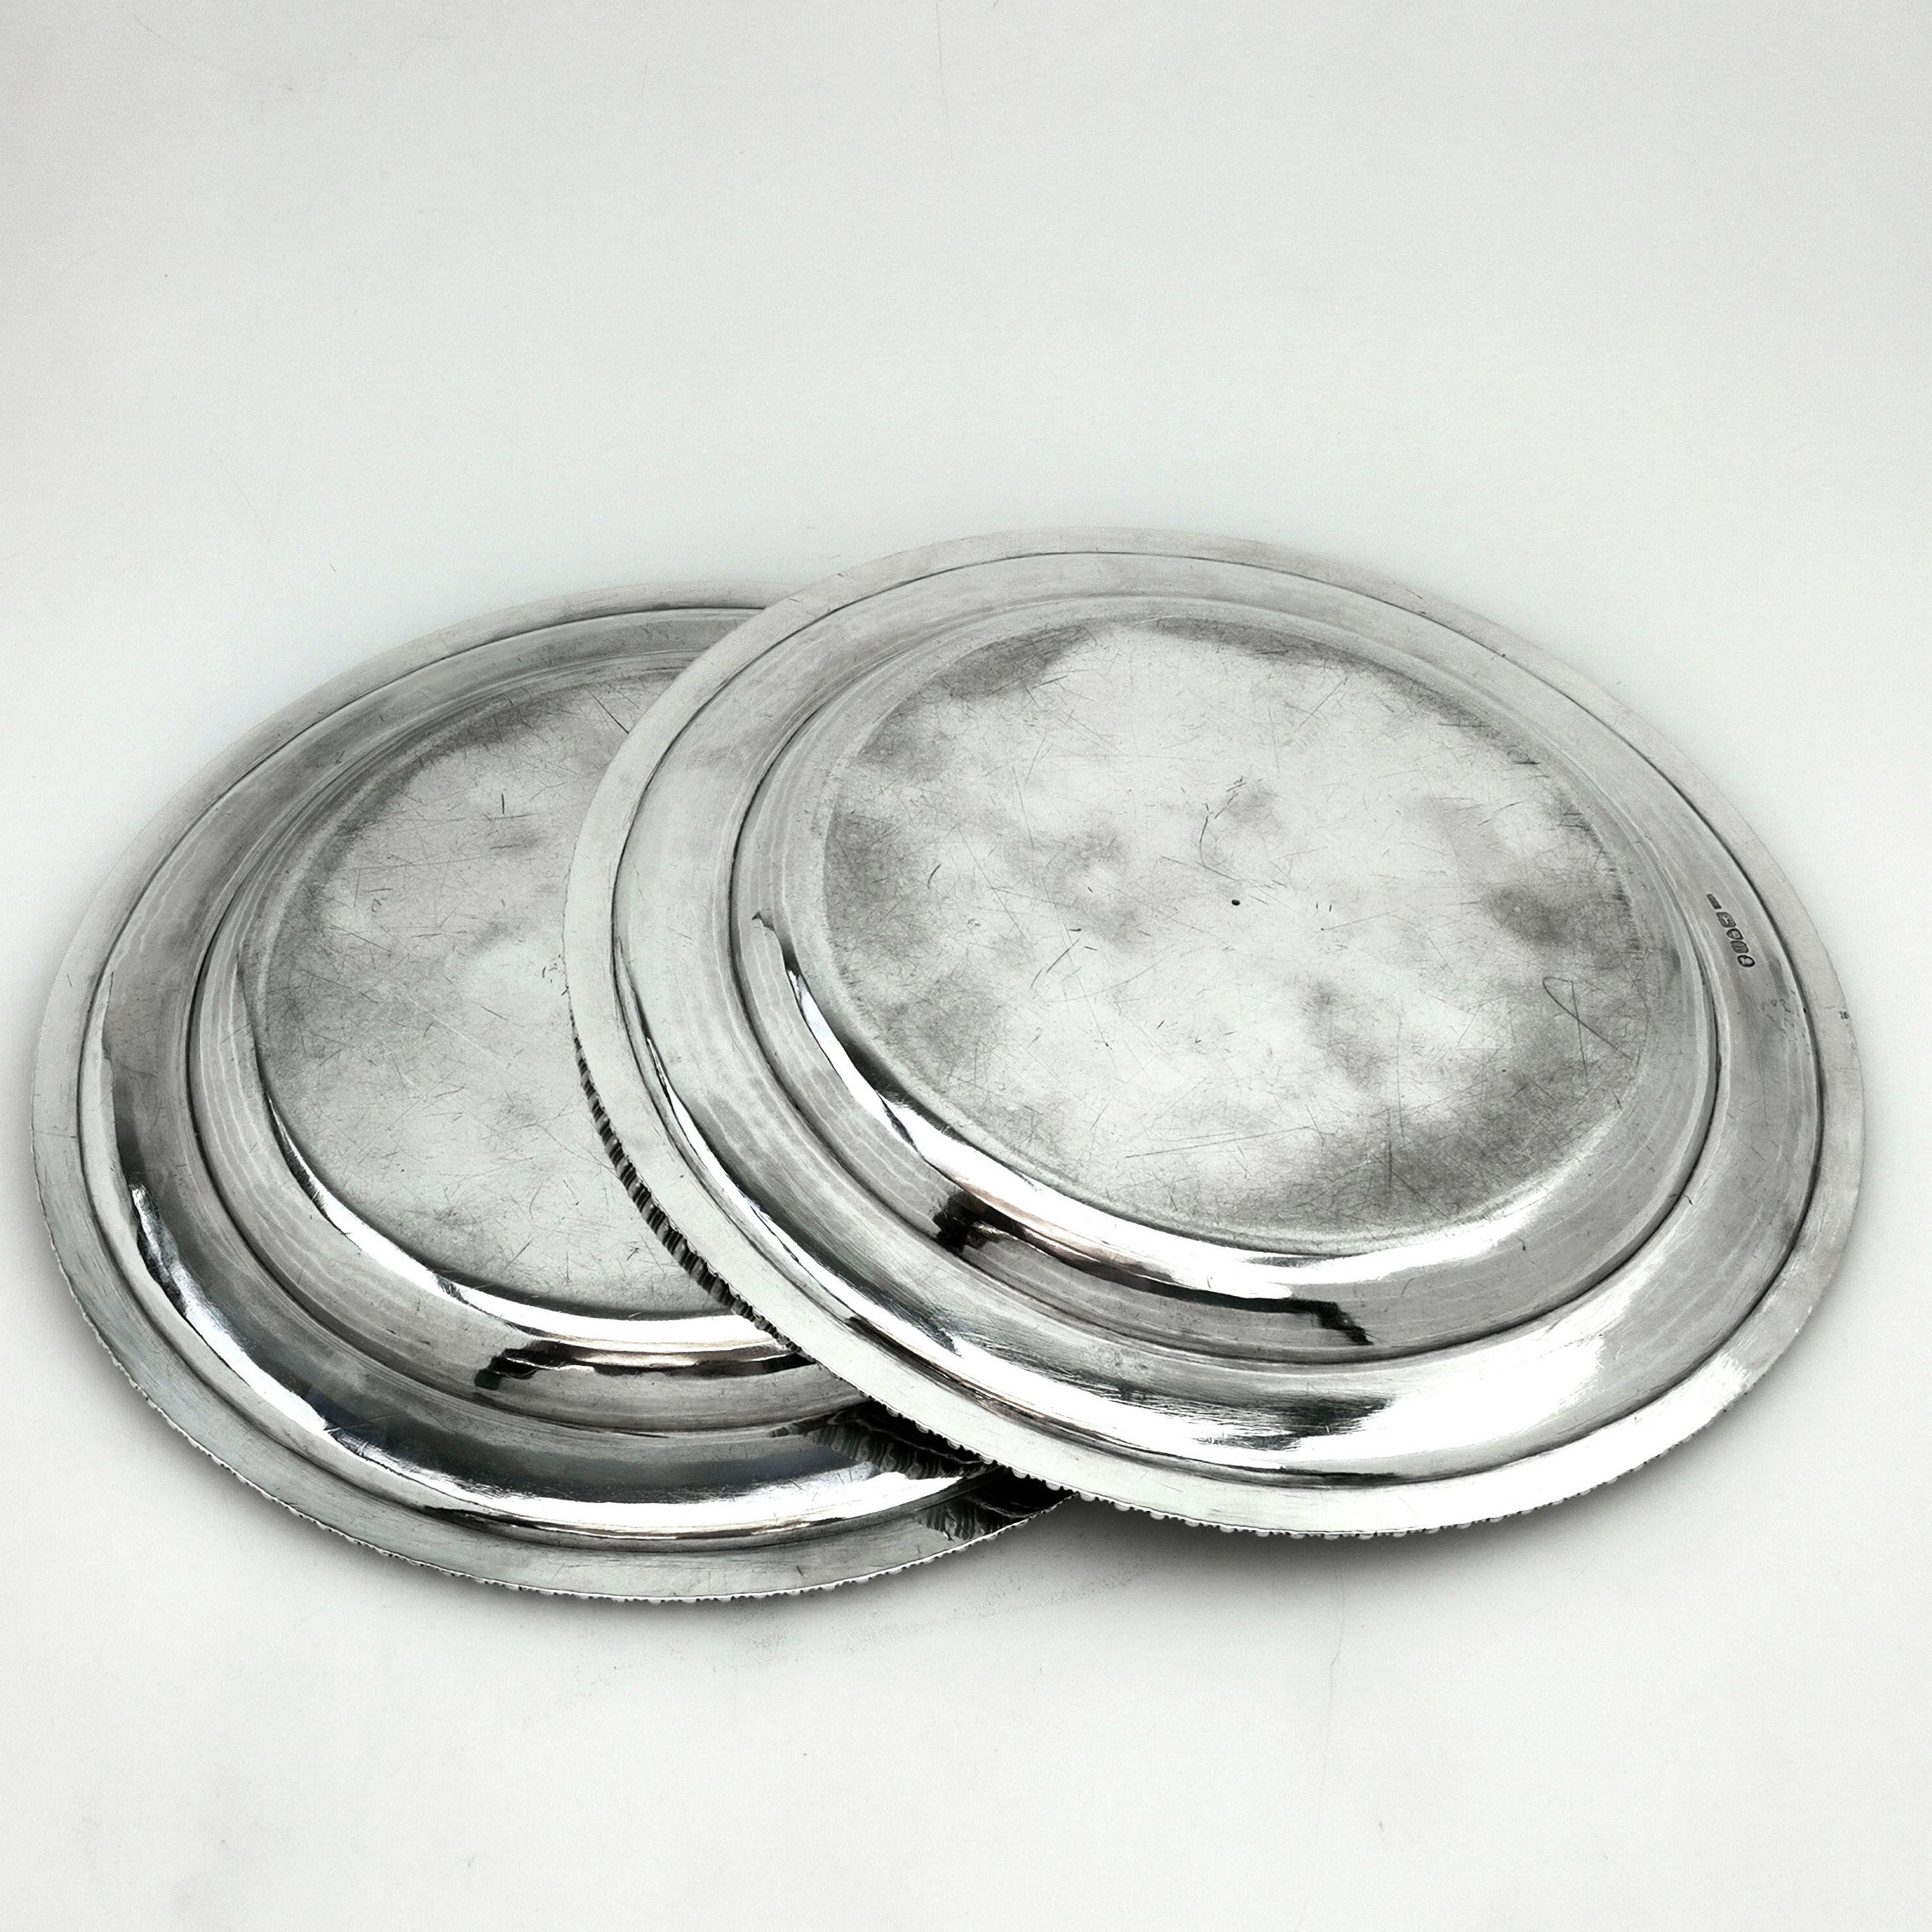 English Pair of Antique Georgian Sterling Silver Second Course Dishes 1823 Large Plates